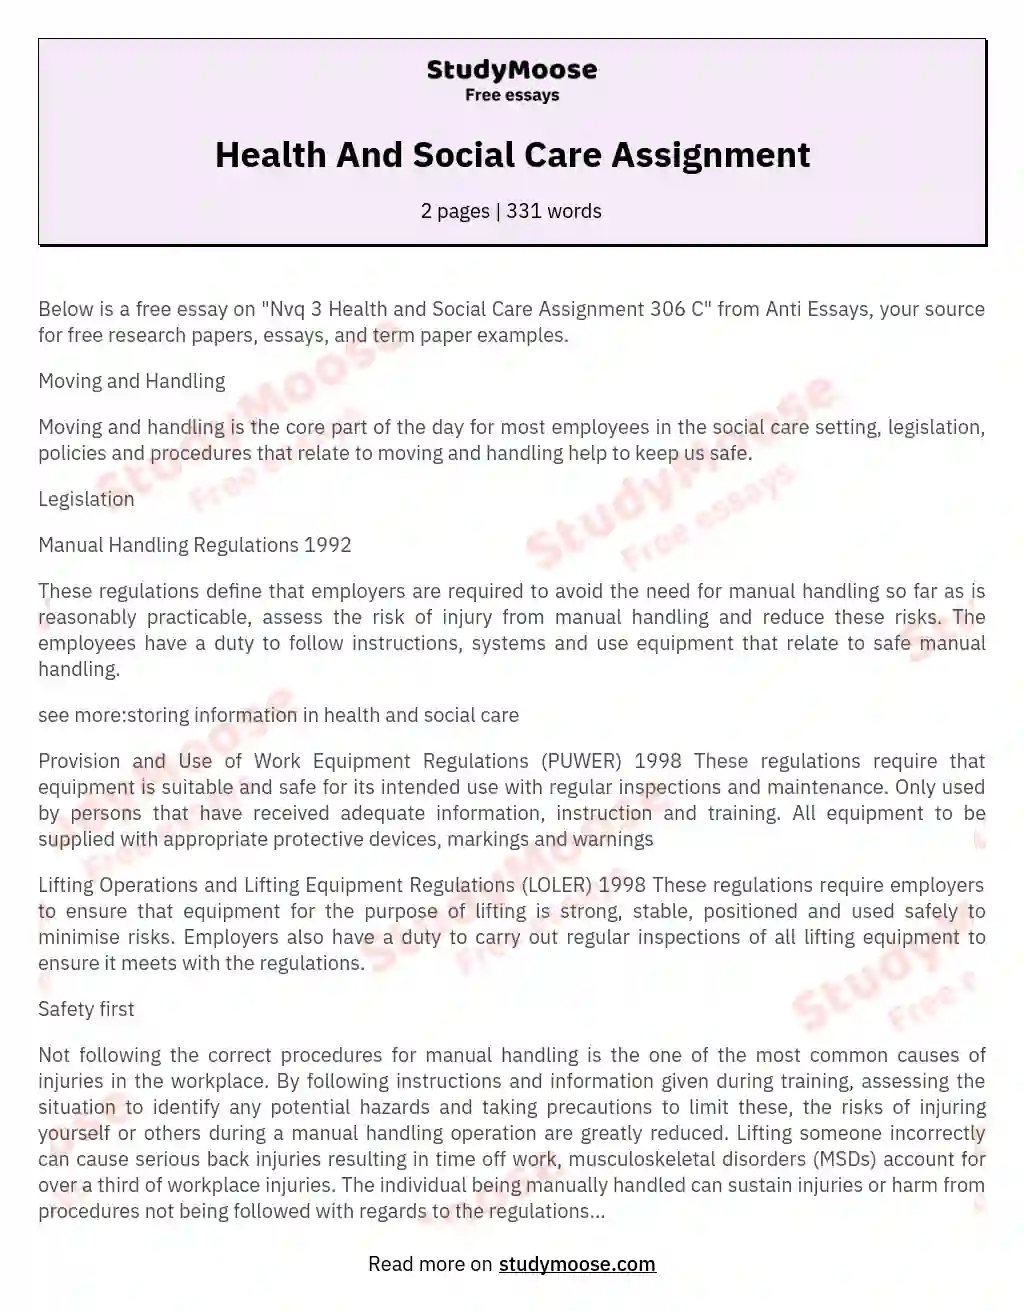 Health And Social Care Assignment essay